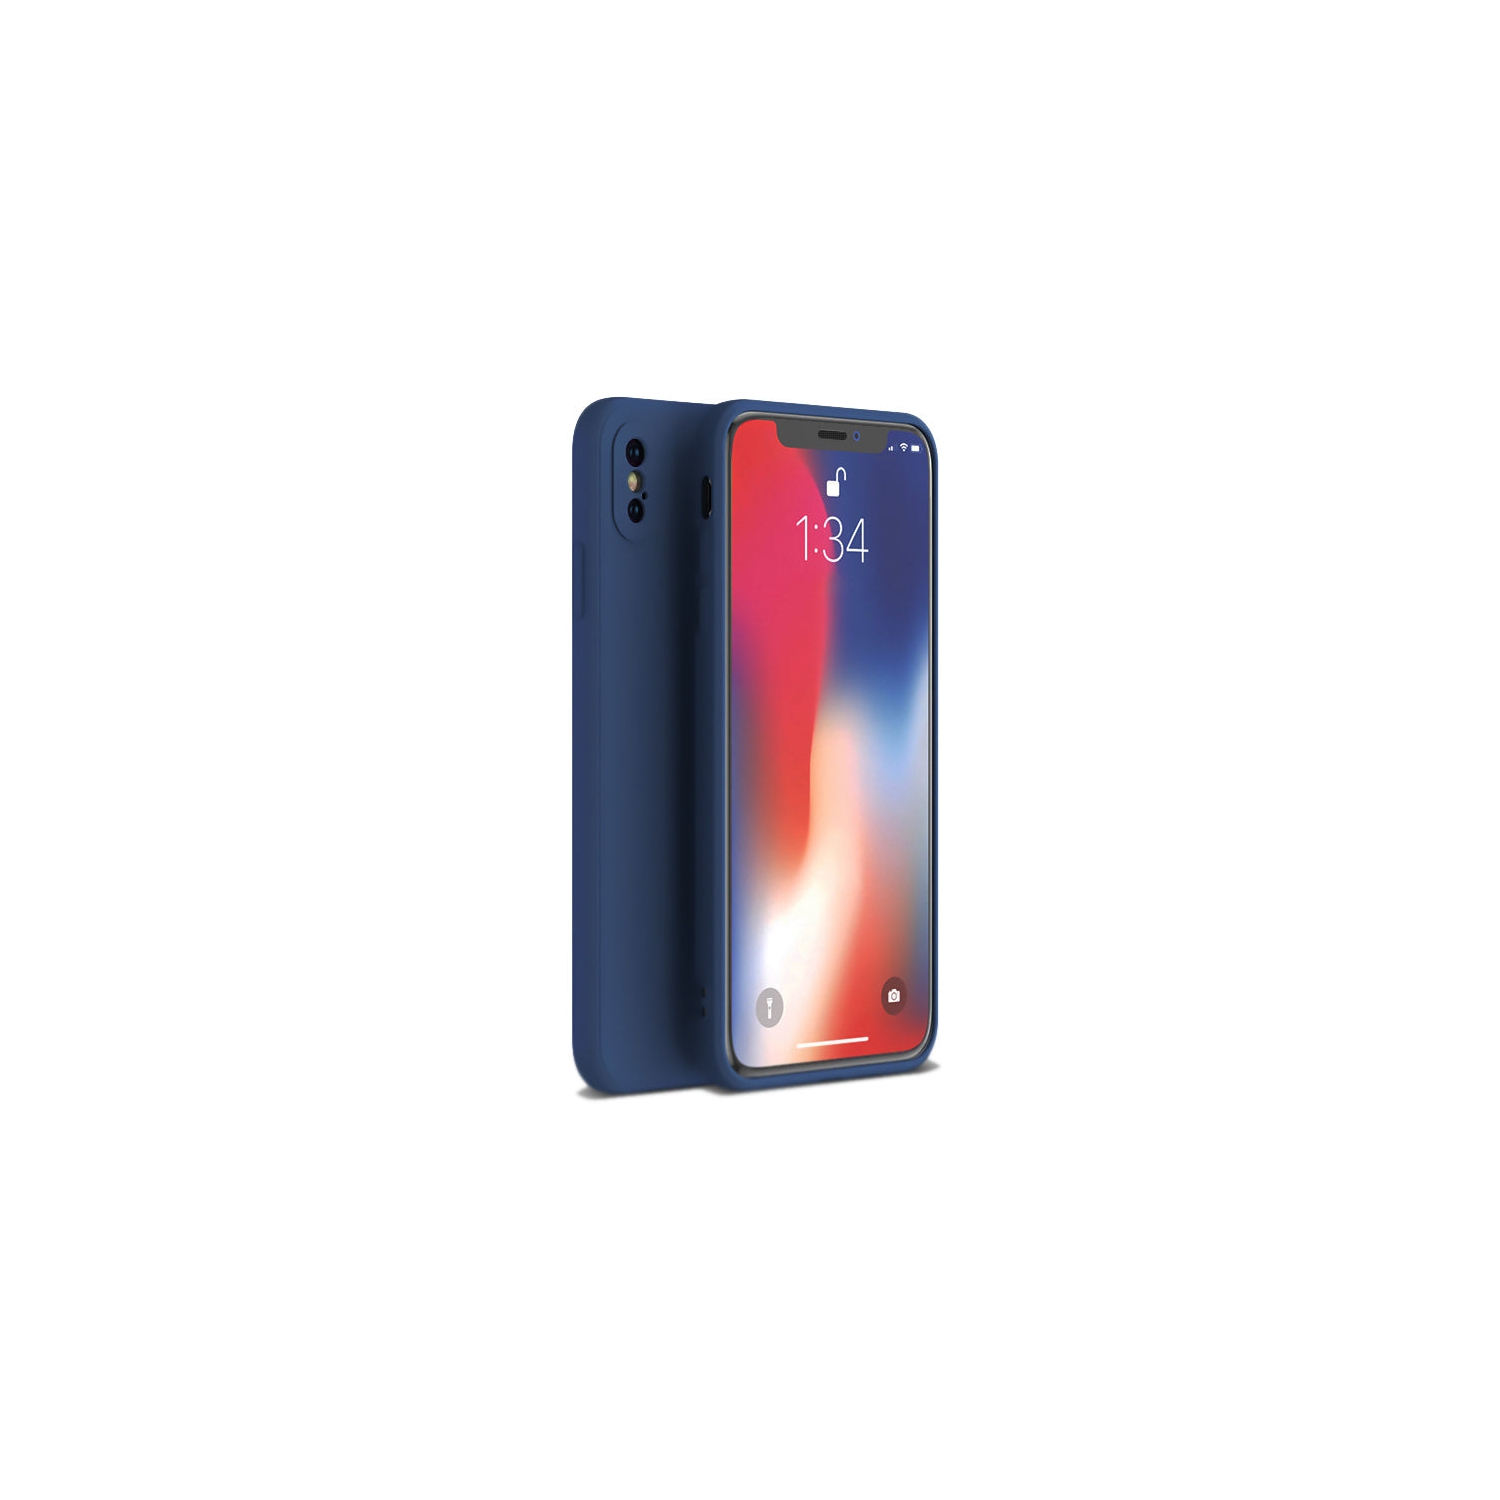 PANDACO Soft Shell Matte Navy Case for iPhone XS Max